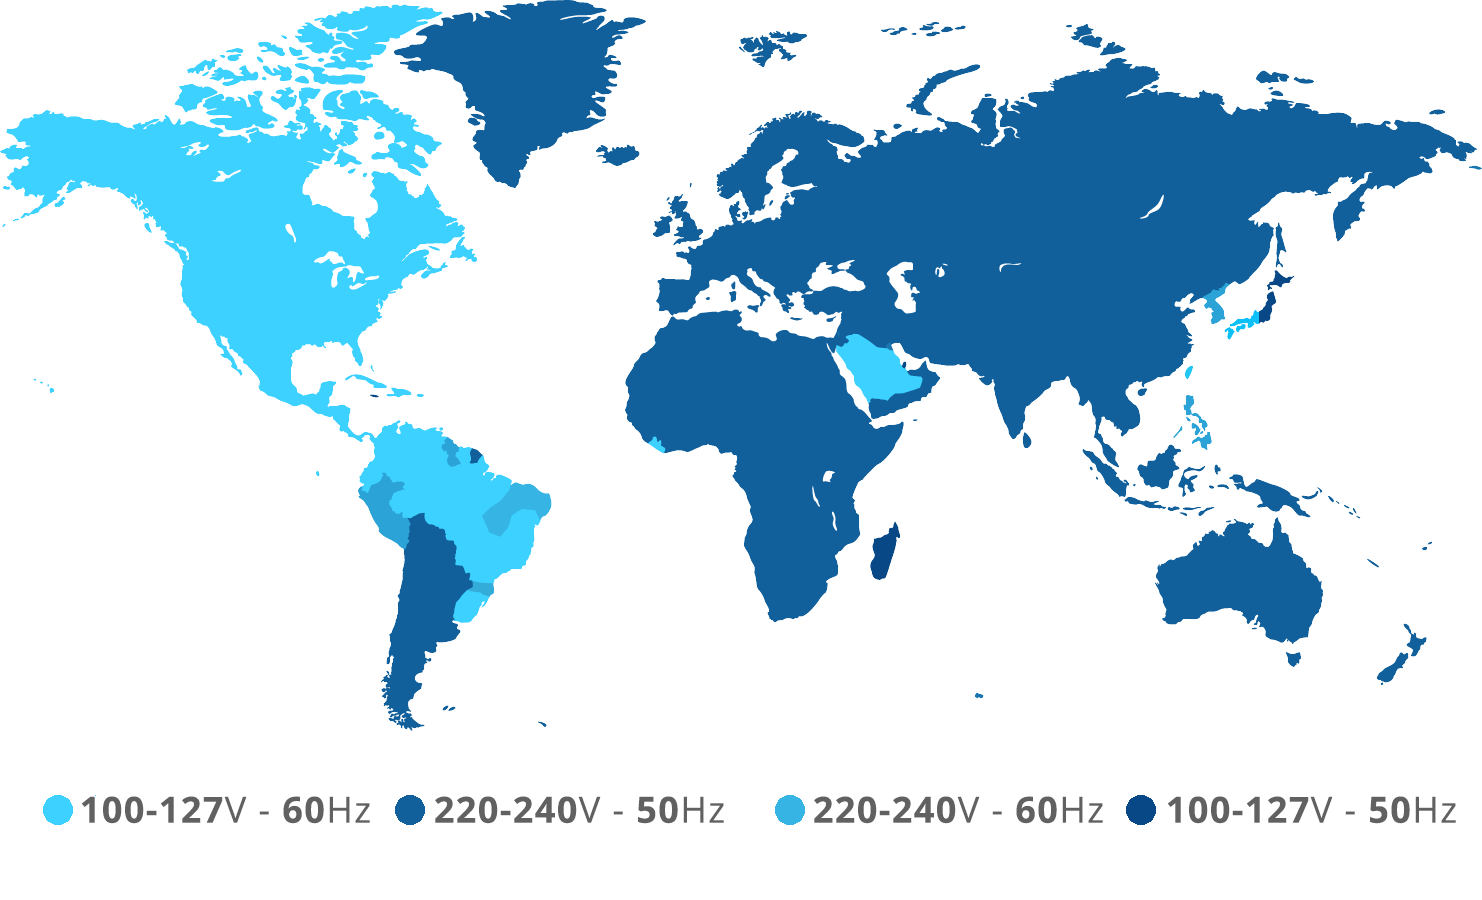 Socket voltage and frequency used around the world